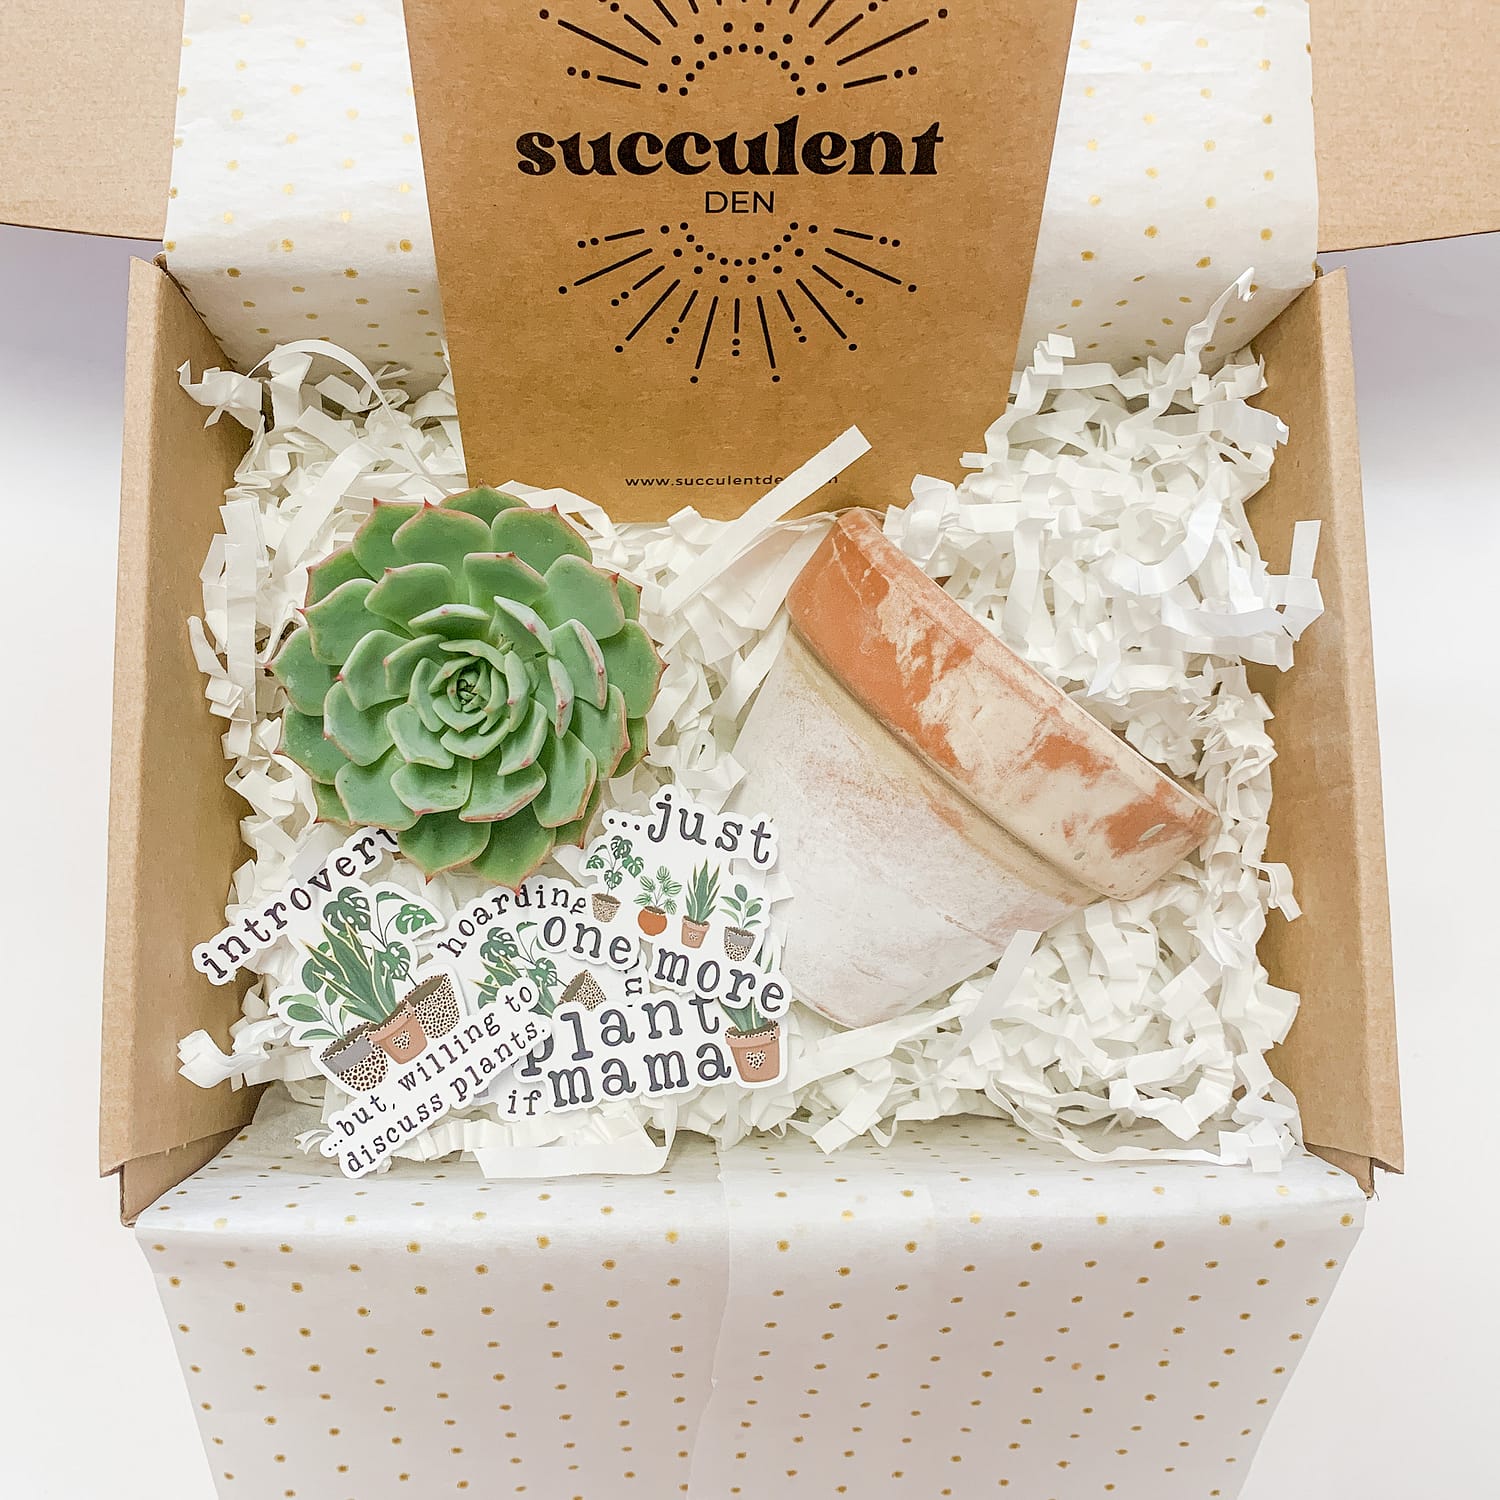 succulent gift box with pot